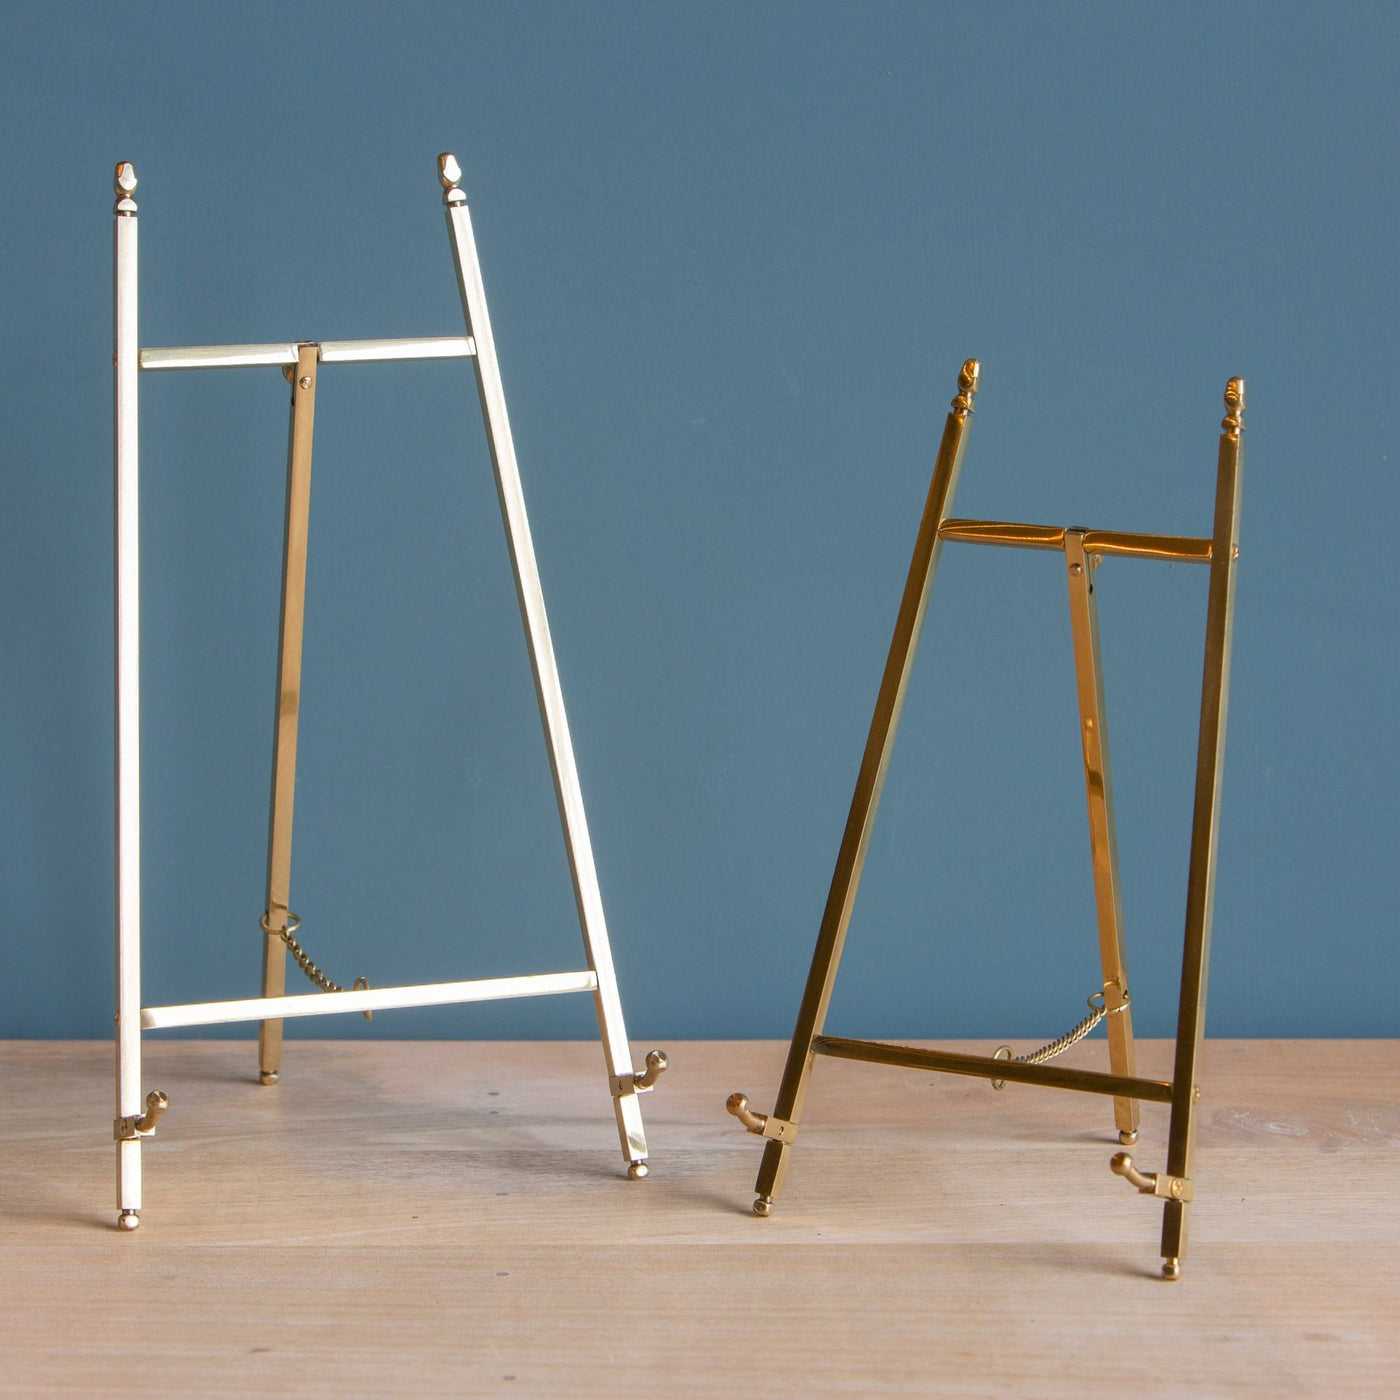 Extra Large Brass Easel 12"